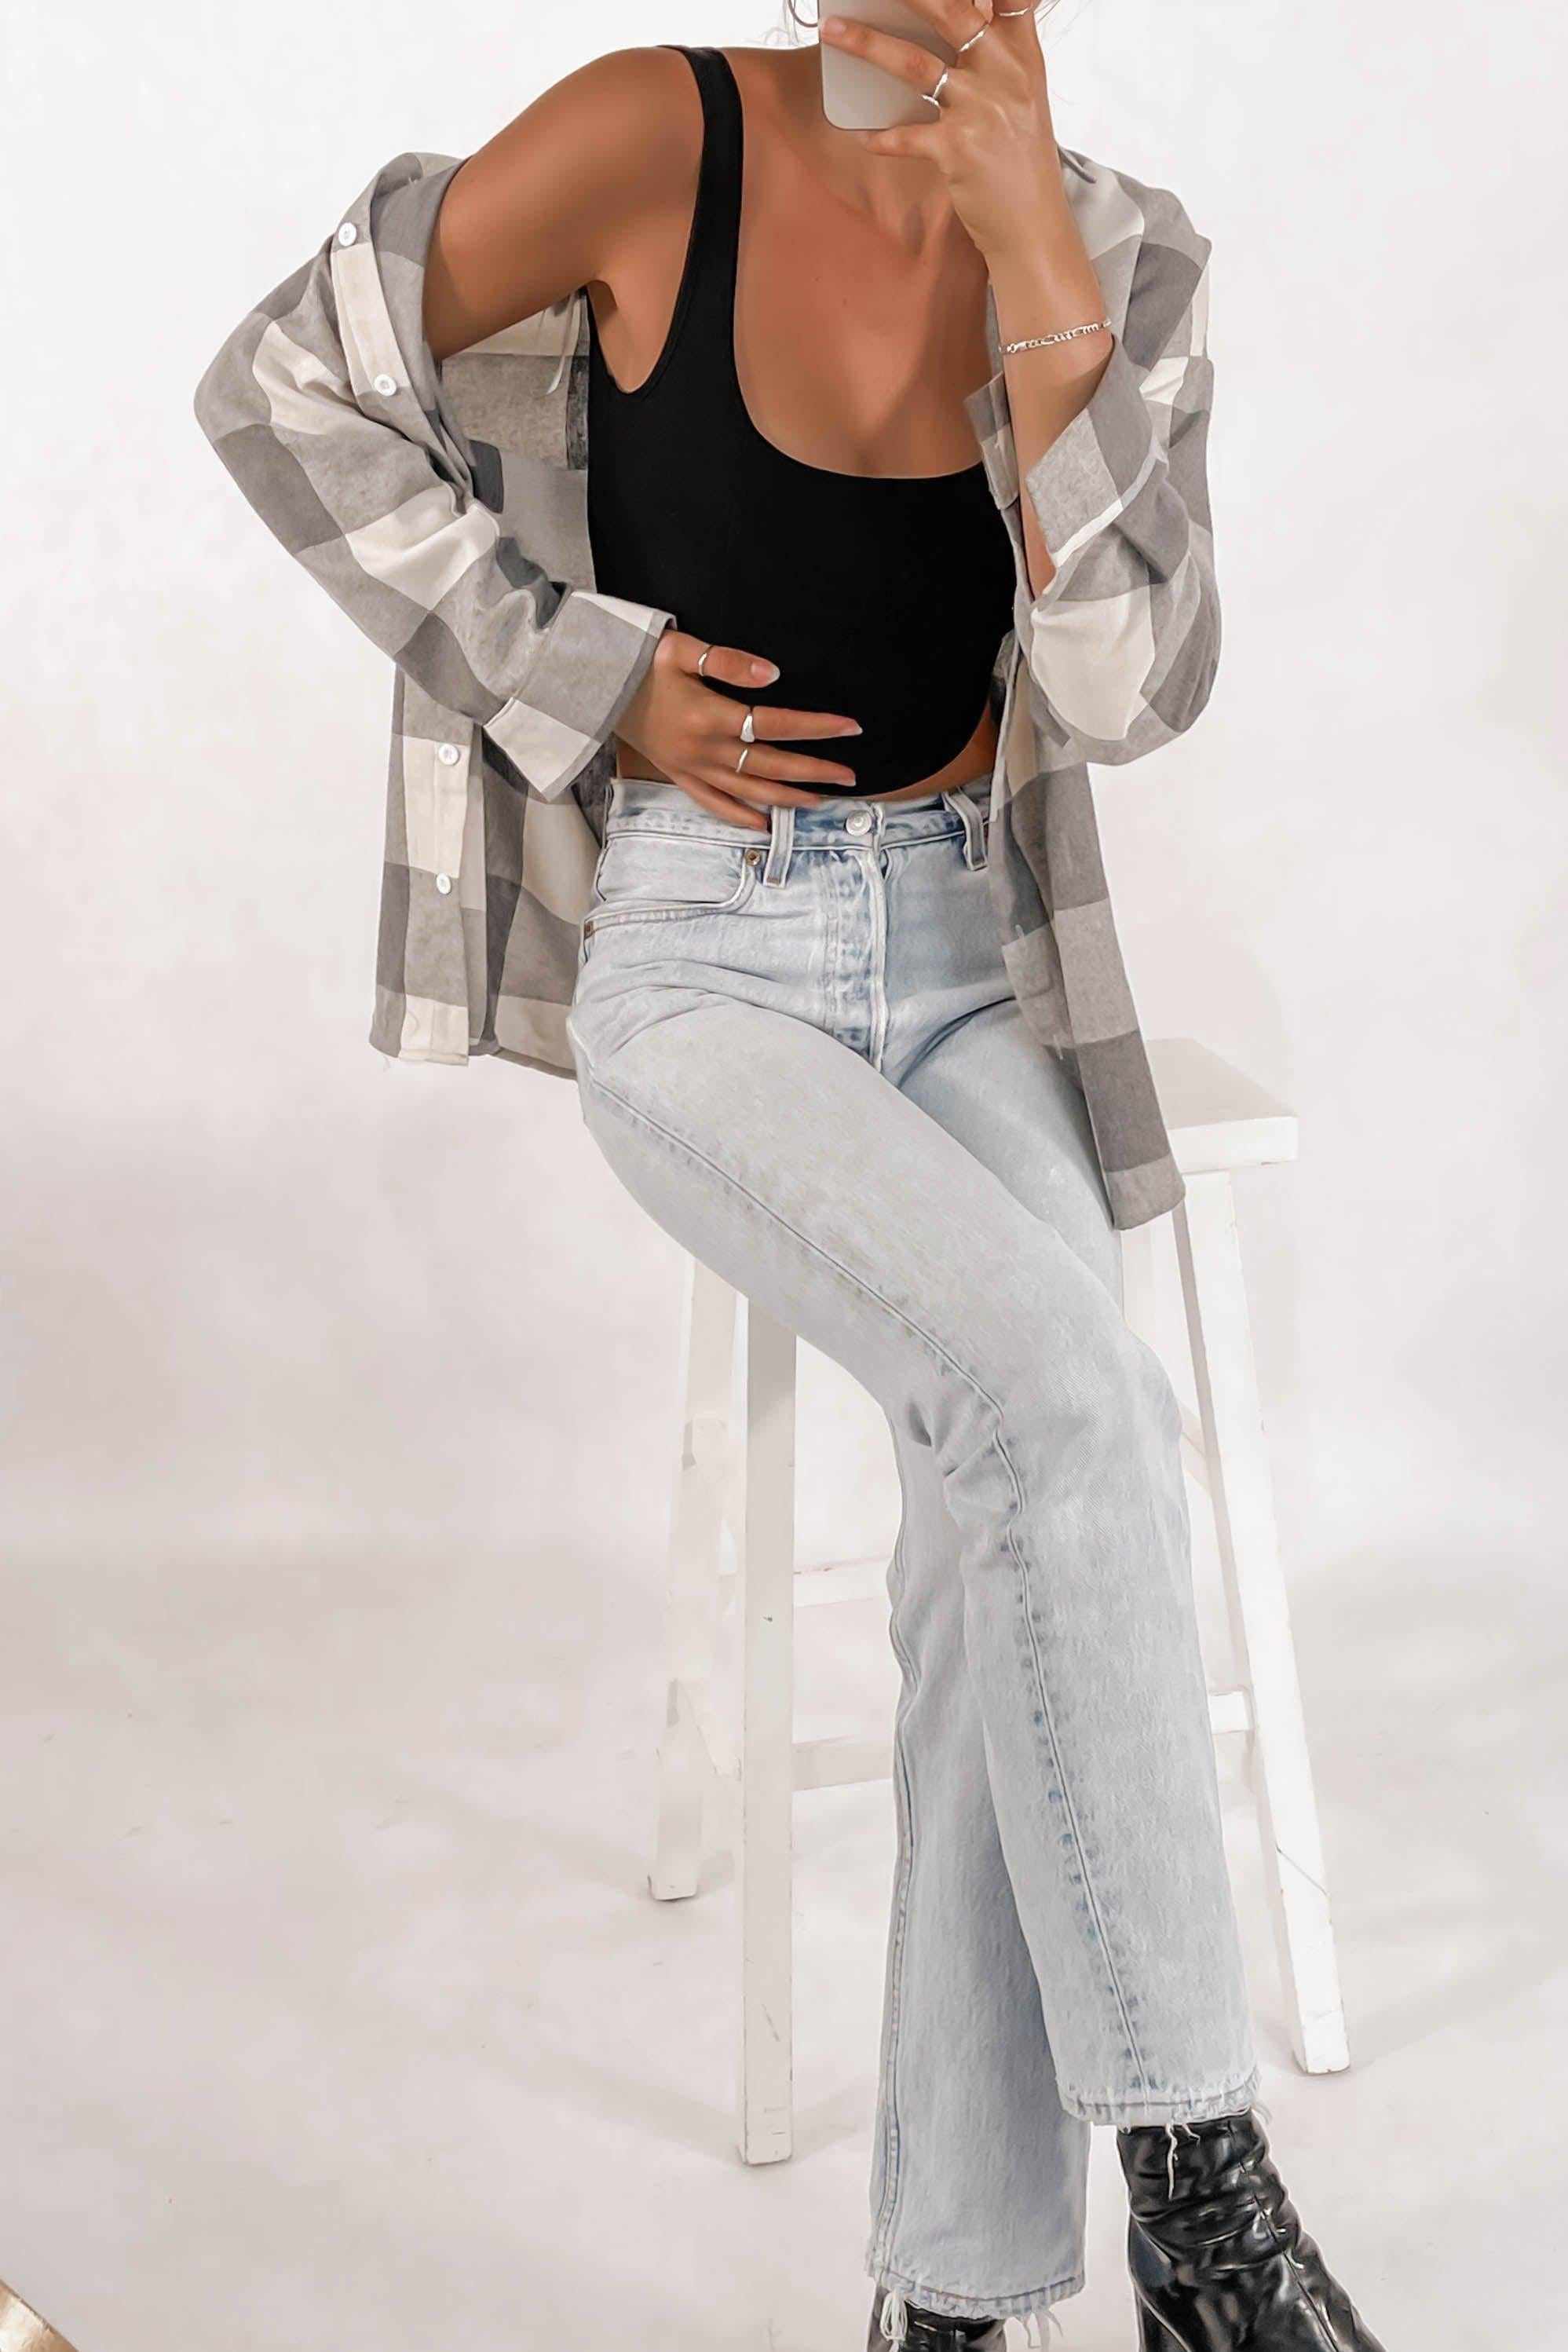 Pyne Top, GREY, LONG SLEEVE, SALE, TOP, TOPS, Our New Pyne Top Is Now Only $61.00 Exclusive At Mishkah, Our New Pyne Top is now only $61.00-We Have The Latest Women's Tops @ Mishkah Online Fashion Boutique-MISHKAH